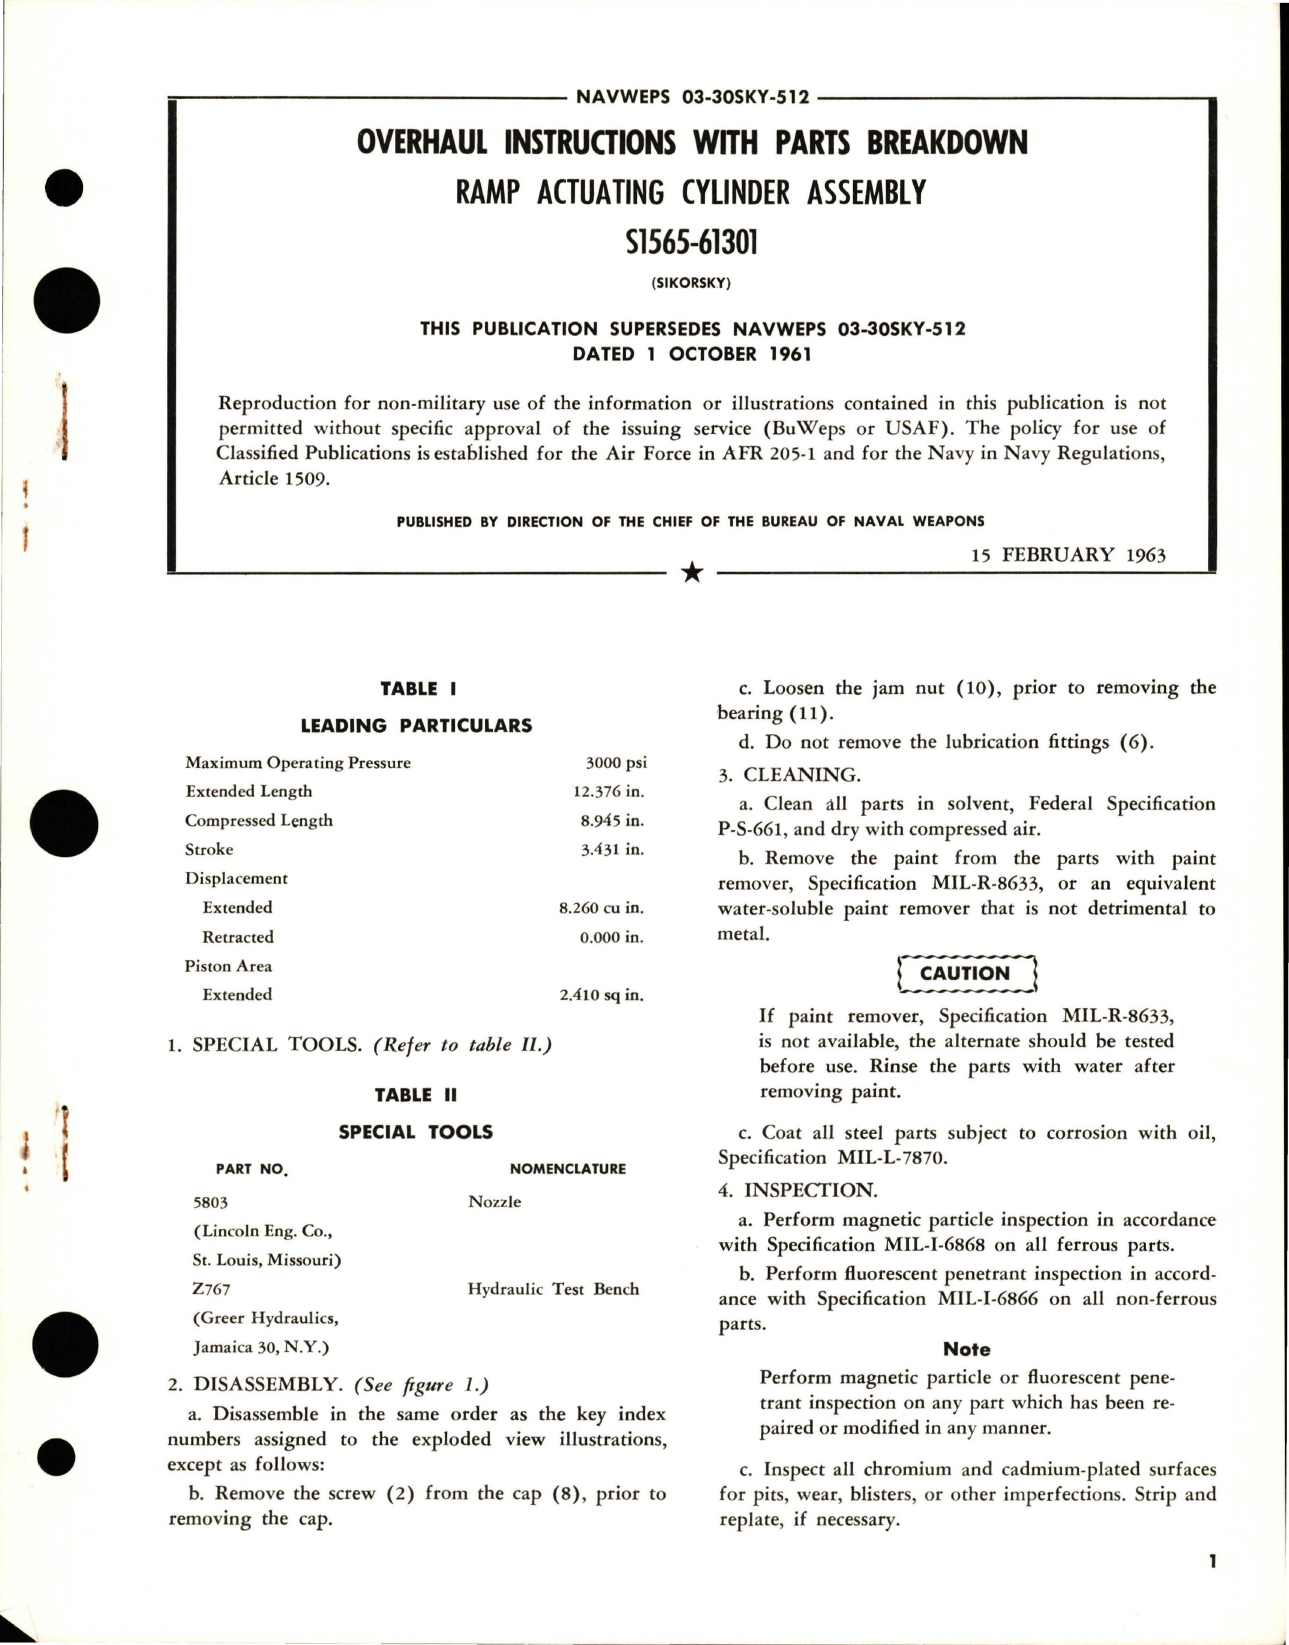 Sample page 1 from AirCorps Library document: Overhaul Instructions with Parts Breakdown for Ramp Actuating Cylinder Assembly - S1565-61301